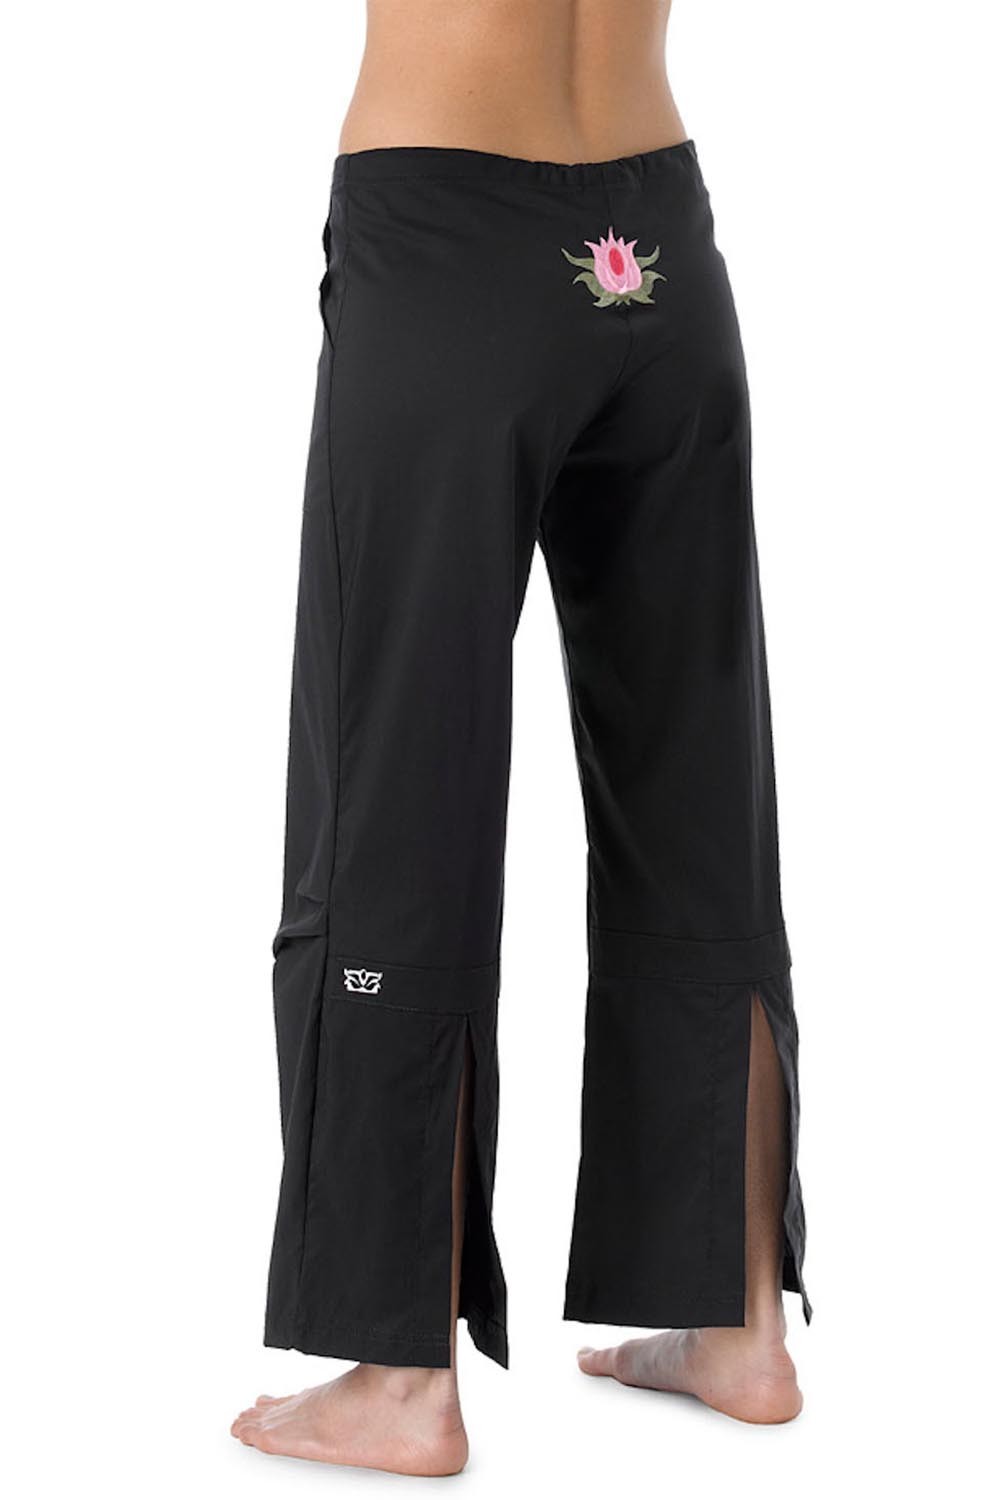 Be Present Yoga Pant Rose Pink Size Women’s L USA Back Slit Lotus  Embroidered 